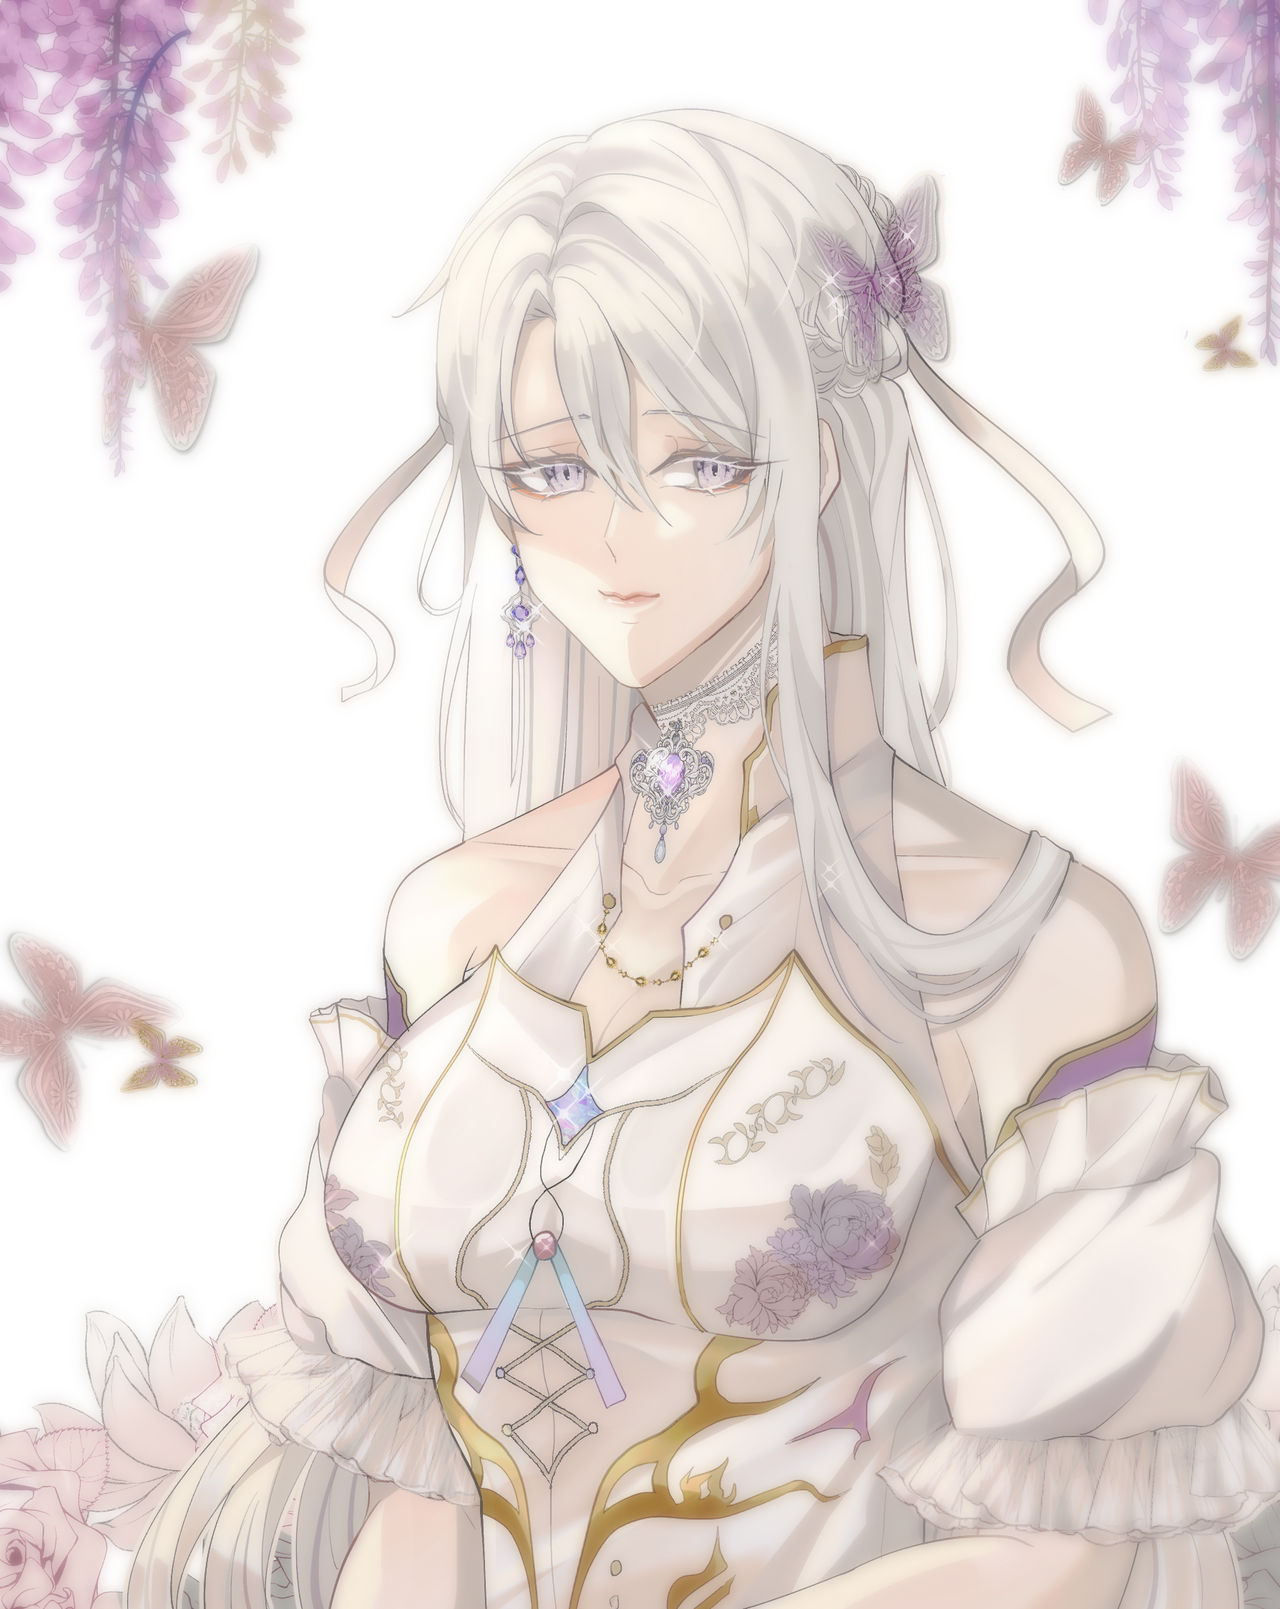 OC Character] Anime Girl With White Hair by vivienng on DeviantArt